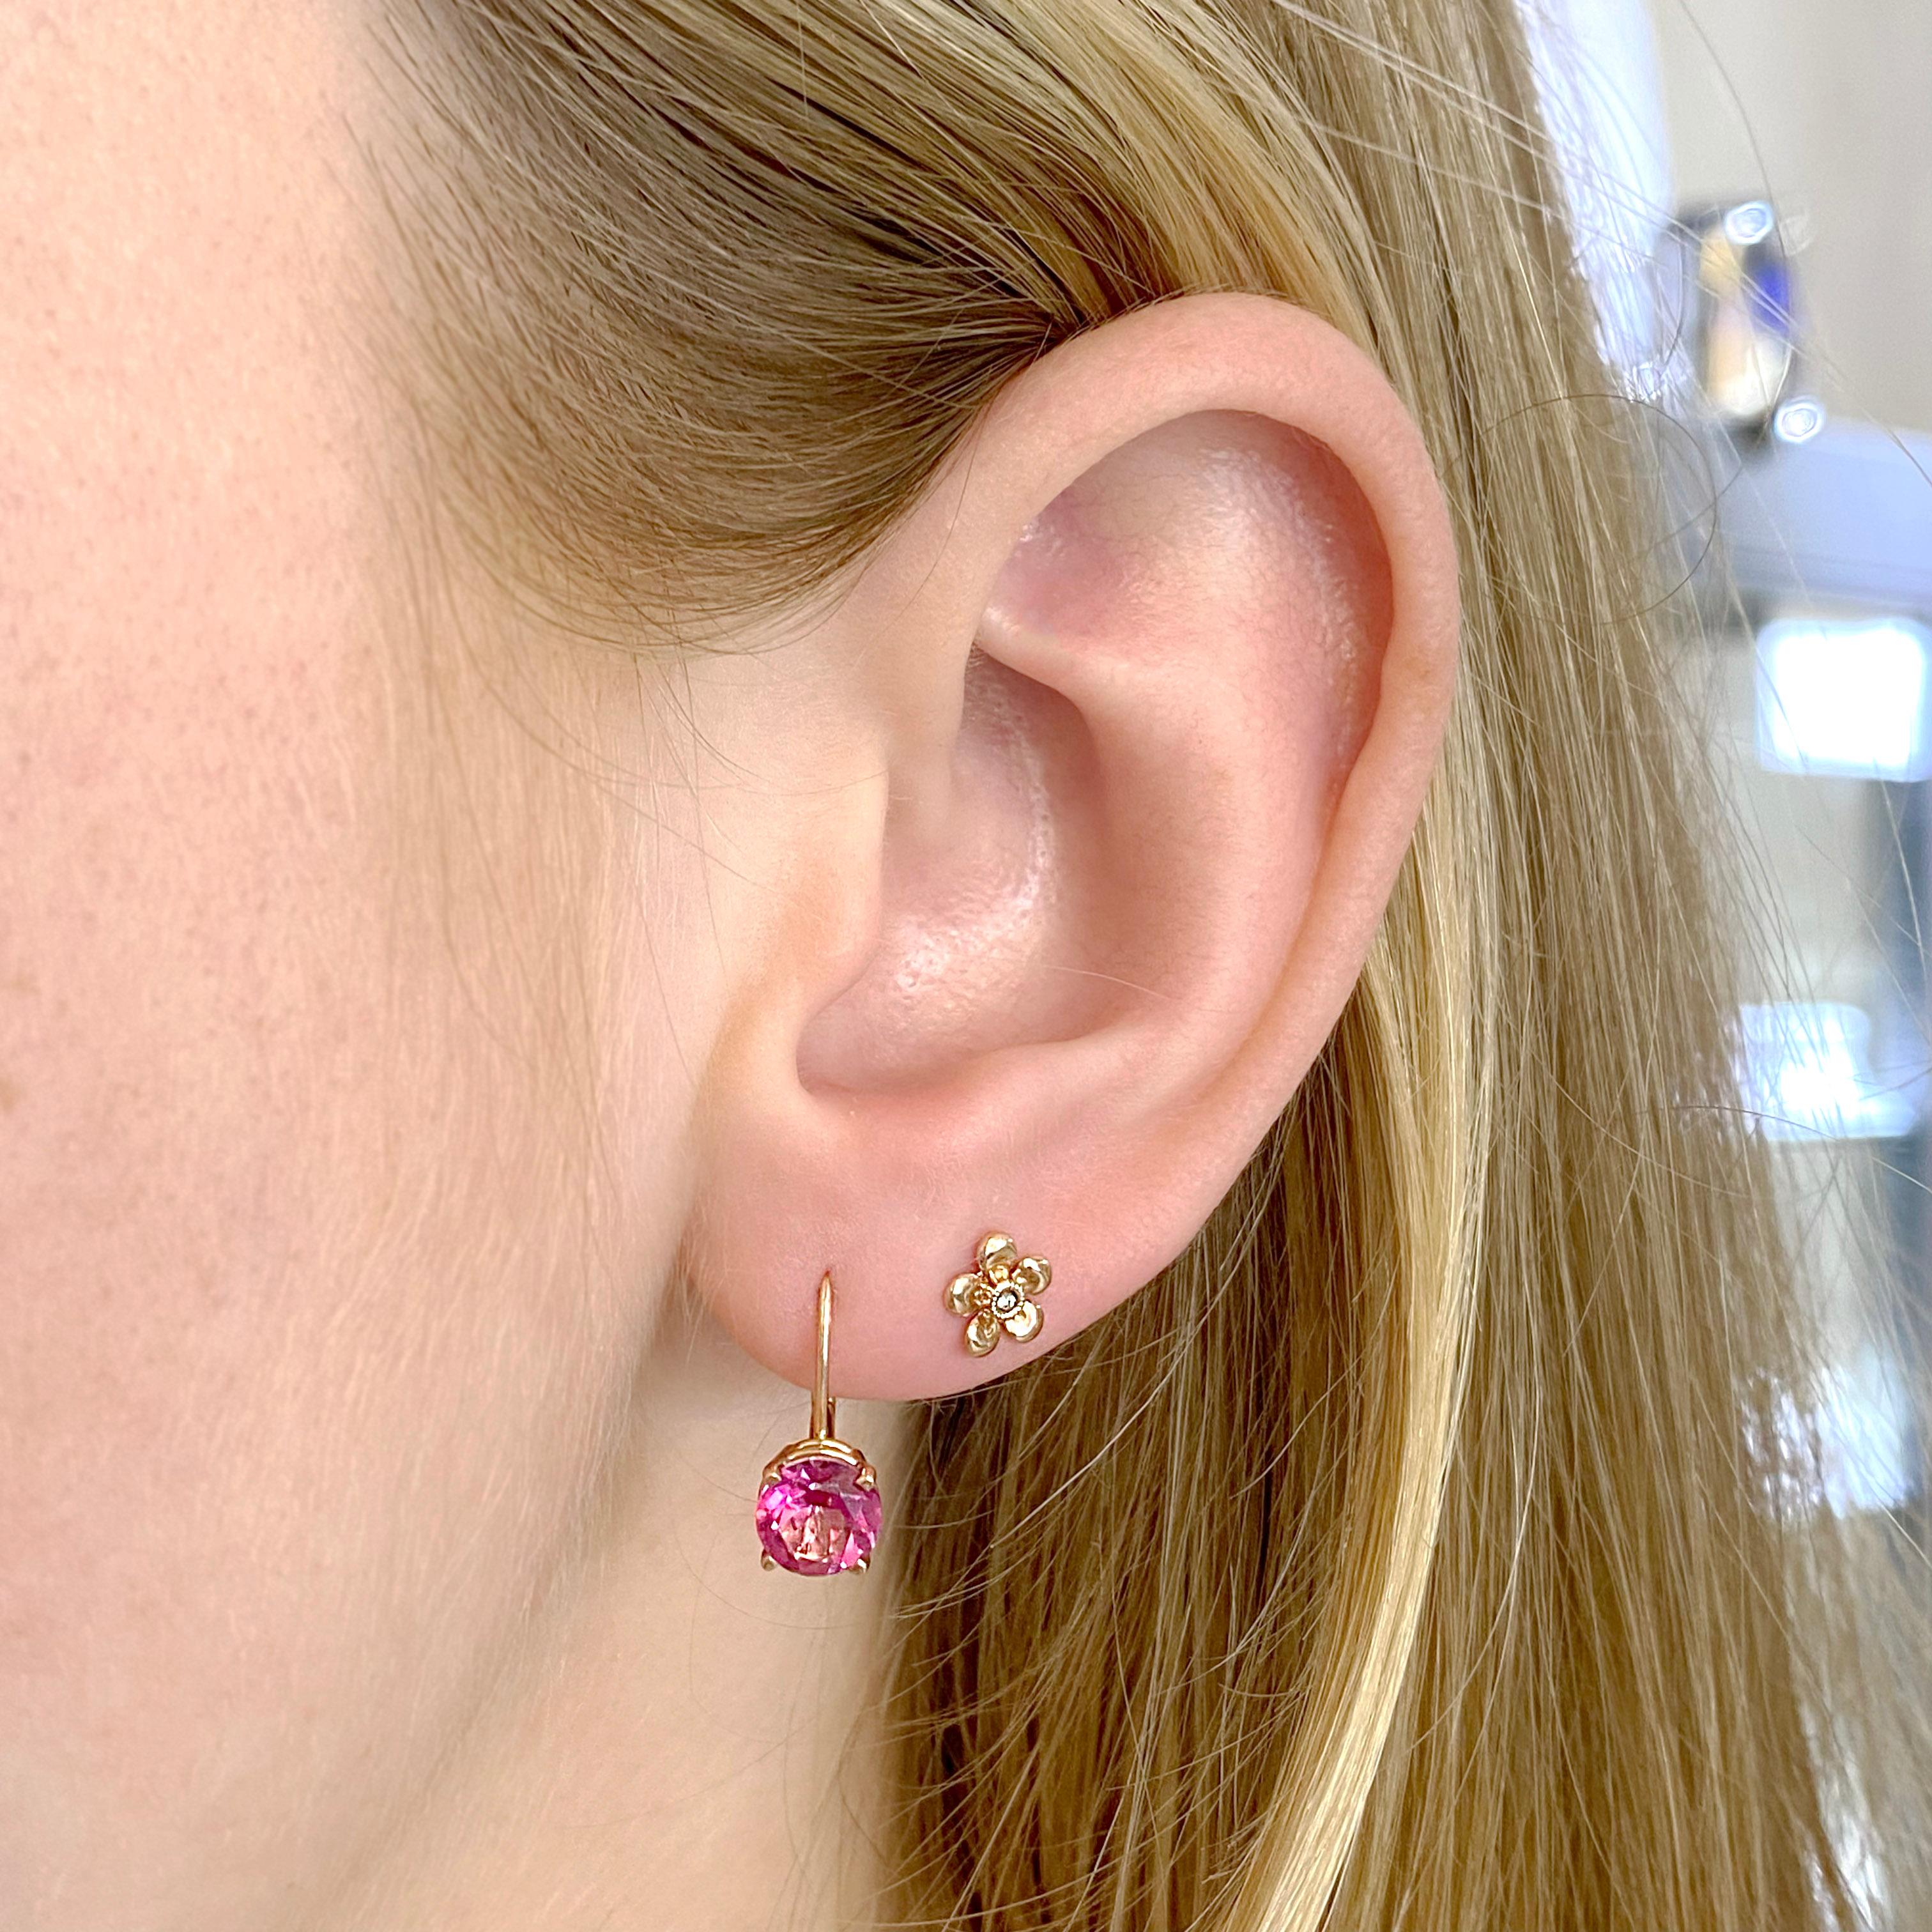 There is a one carat natural pink topaz in each of these 14 karat rose gold earrings.  The lever backs have a hinge on them so that it is easy to lock on your ear! The pink topaz are genuine gemstones with an amazing depth of color. These earrings